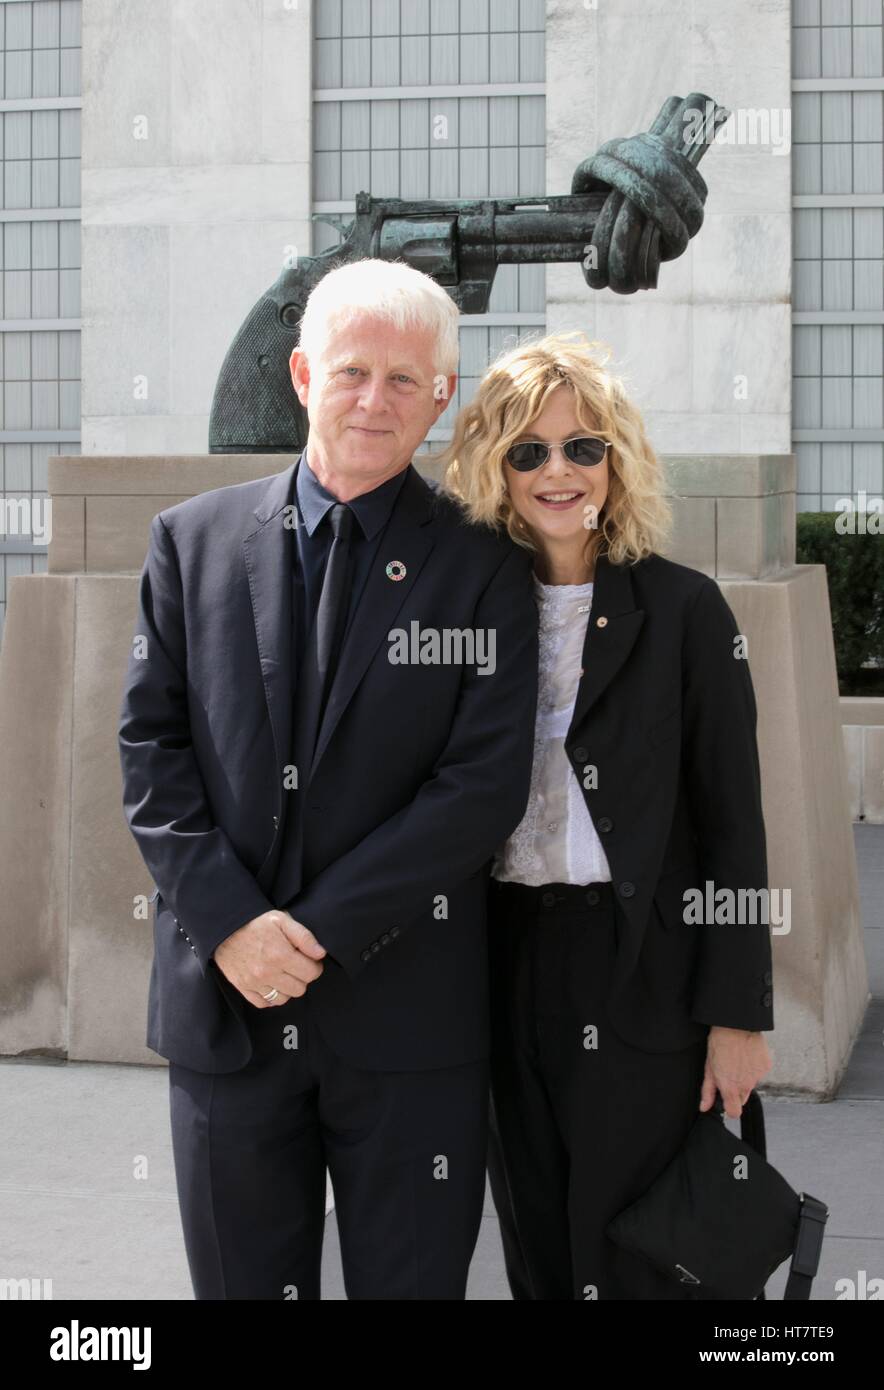 United Nations, New York, USA, September 20 2016 - Richard Curtis (left), filmmaker and founder of Project Everyone and Actress and Producer Meg Ryan during the General Assembly 71th Session Participated on a Special SDGs Meeting at SDG Media Zone to Mark the First Anniversary of the Adoption of the 2030 Agenda and the Sustainable Development Goals (SDGs) today at the UN Headquarters in New York. Photo: Luiz Rampelotto/EuropaNewswire | usage worldwide Stock Photo